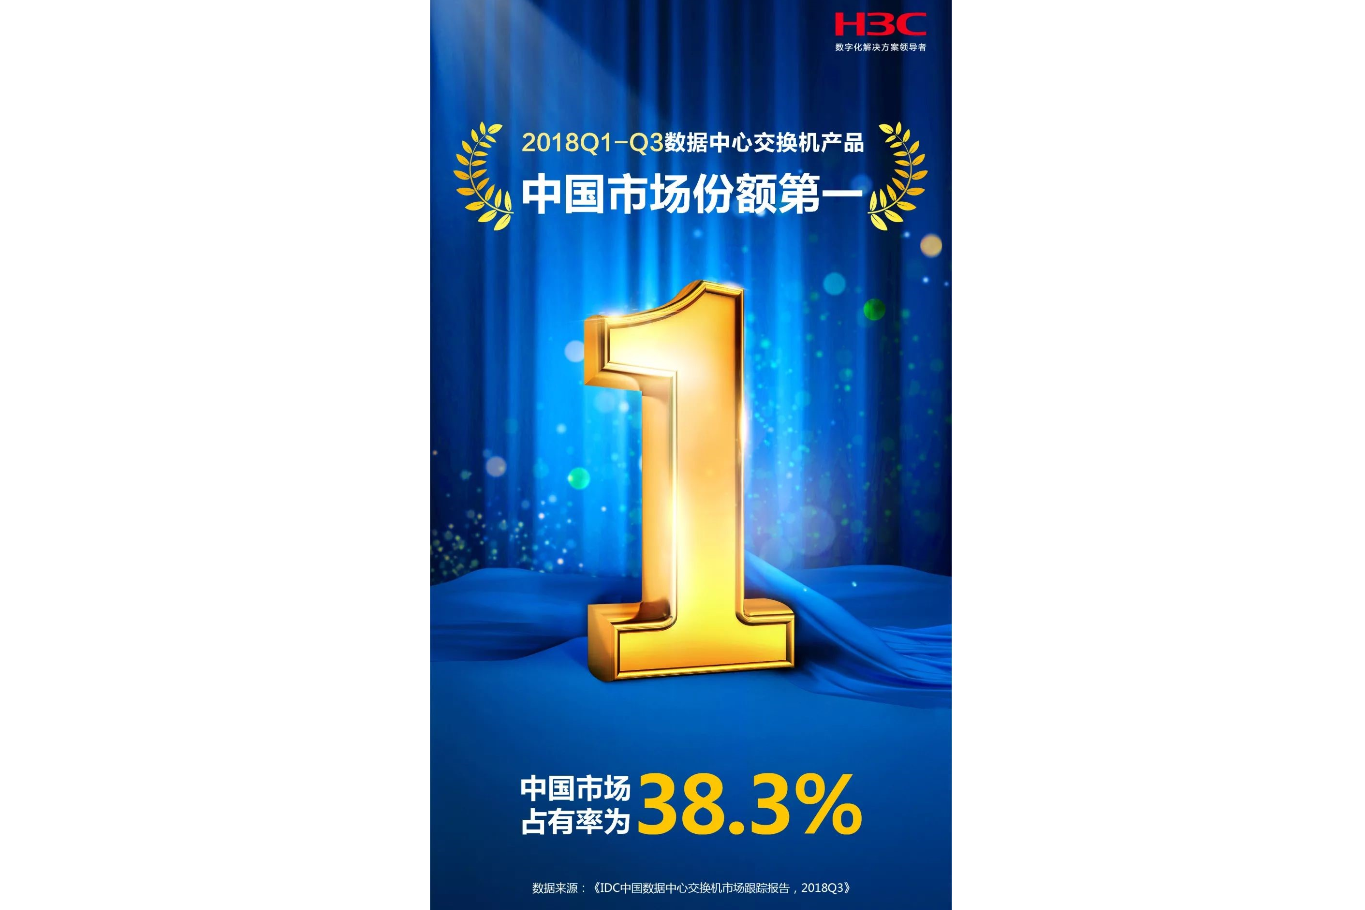 New H3C Gained Largest Share in China's Data Center Switch Market in First Three Quarters of 2018